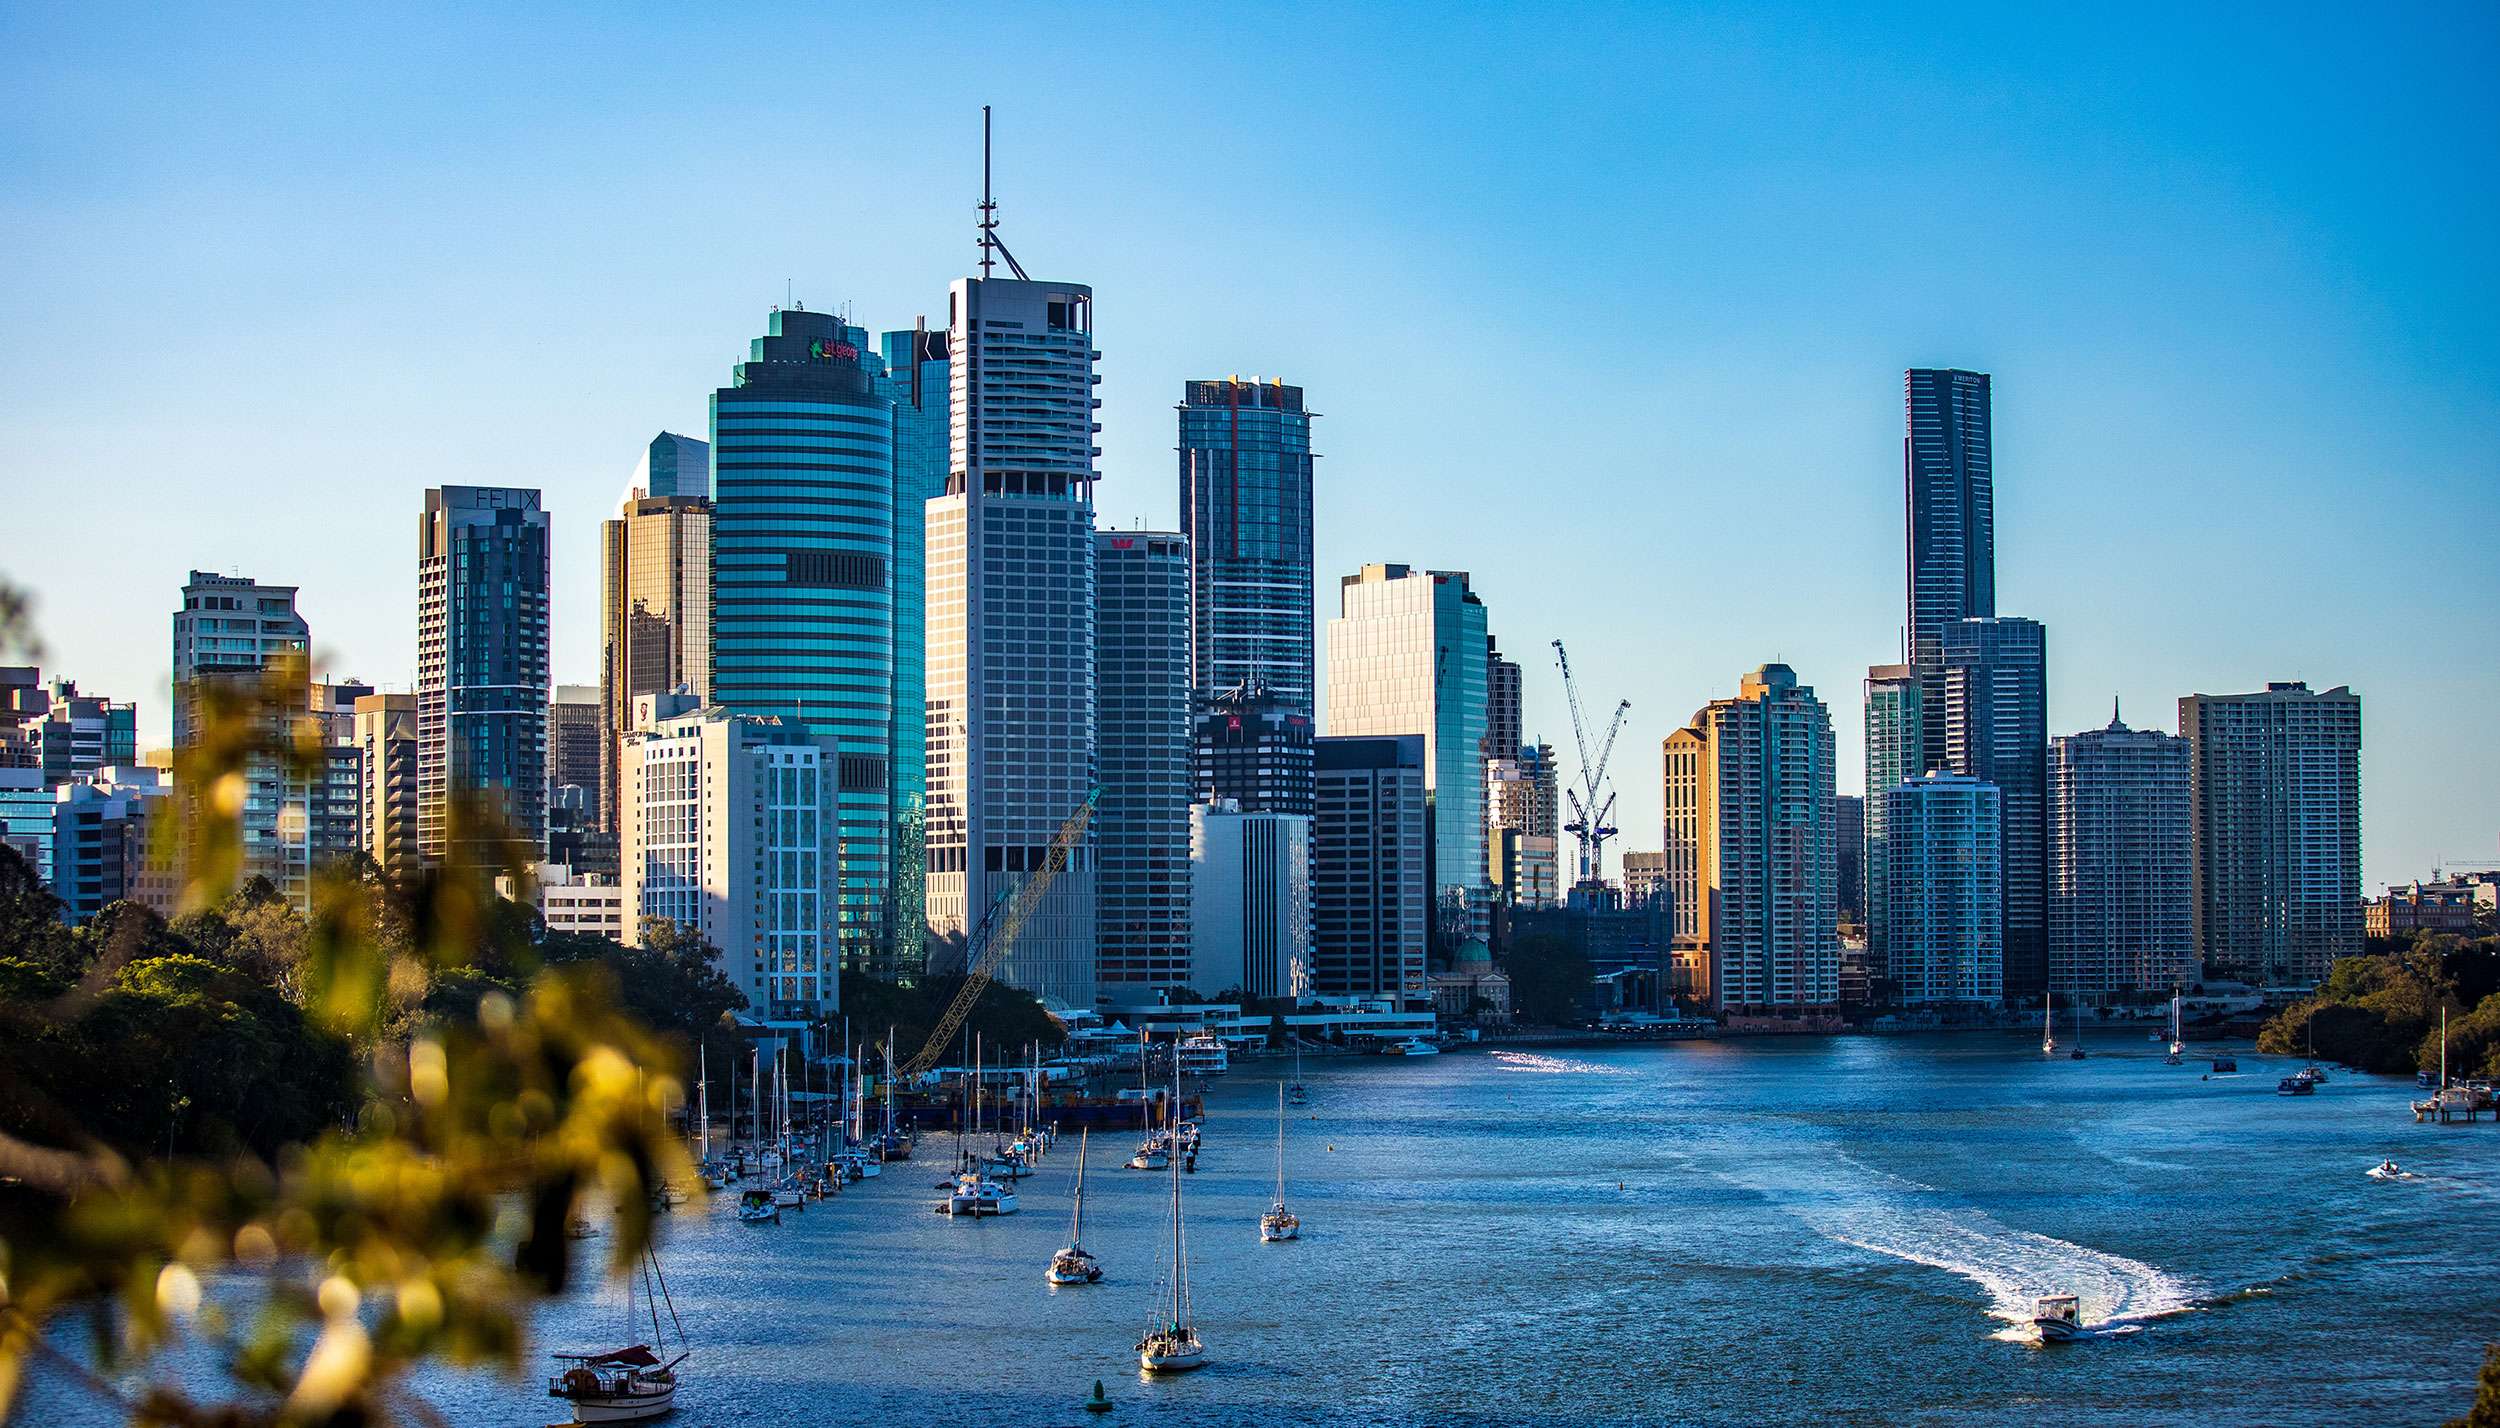 What can we expect the Brisbane property market will do over the second half of 2022?